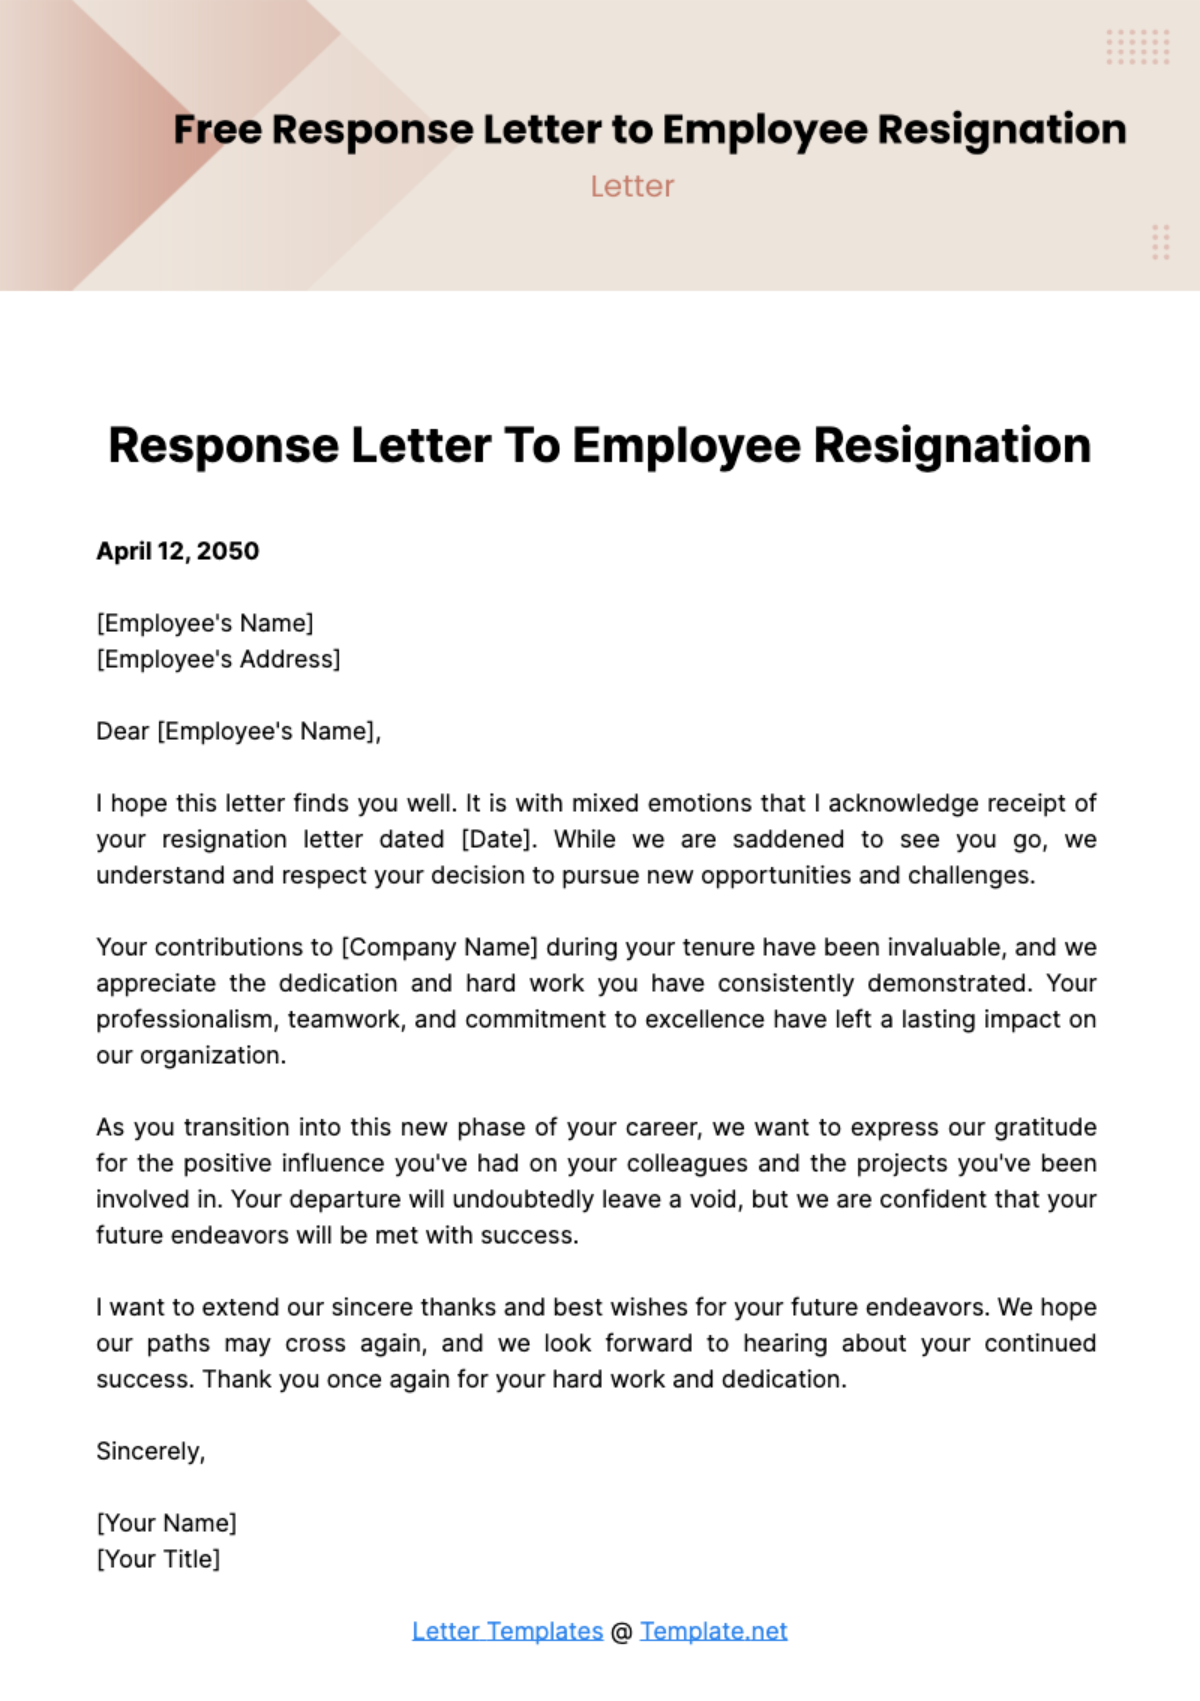 Response Letter to Employee Resignation Template